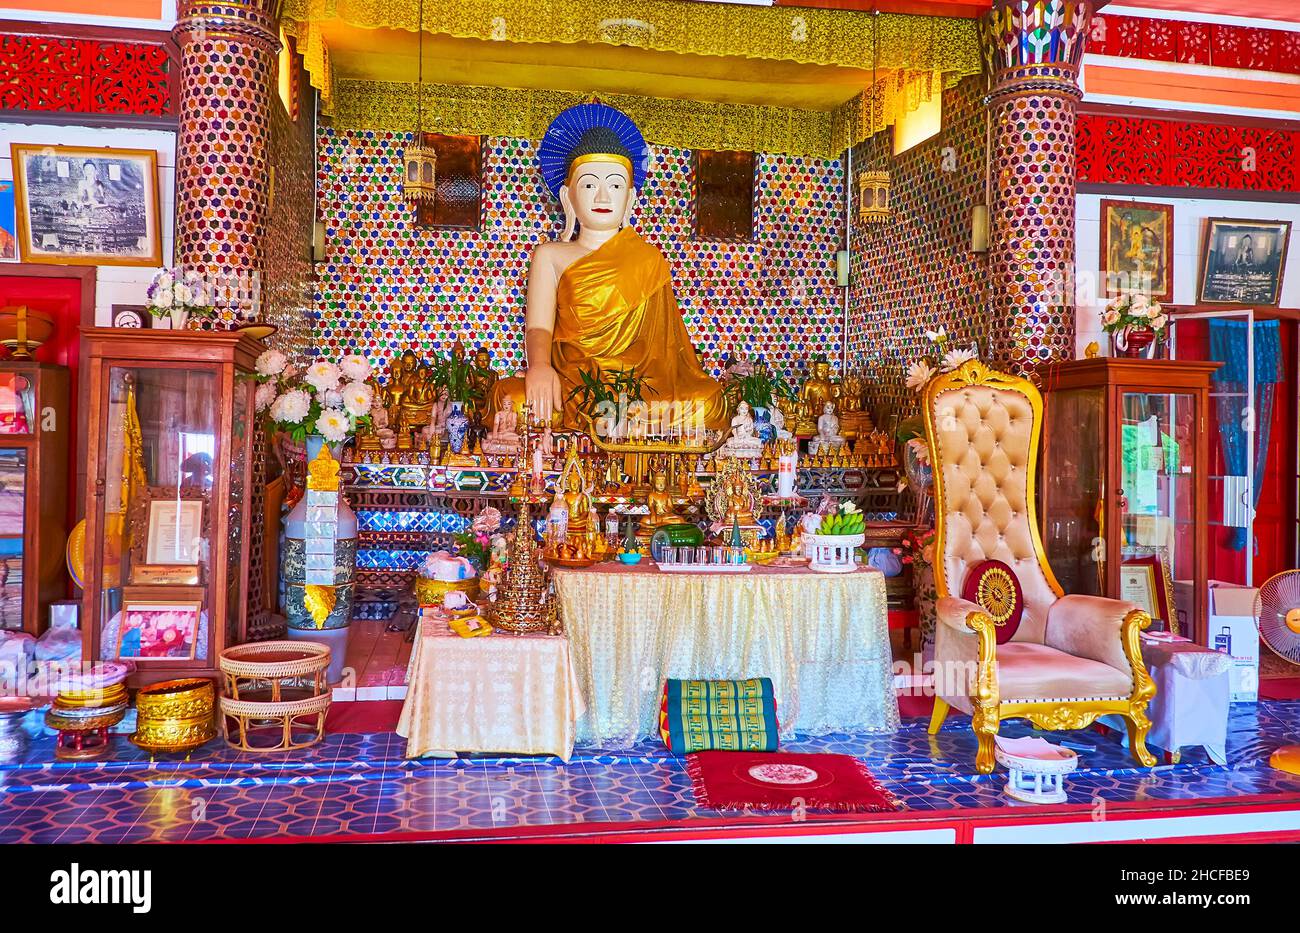 CHIANG MAI, THAILAND - MAY 4, 2019: The altar of the shrine of Wat Sai Moon Myanmar temple, decorated with mirror mosaic patterns, Buddha Image, pilla Stock Photo